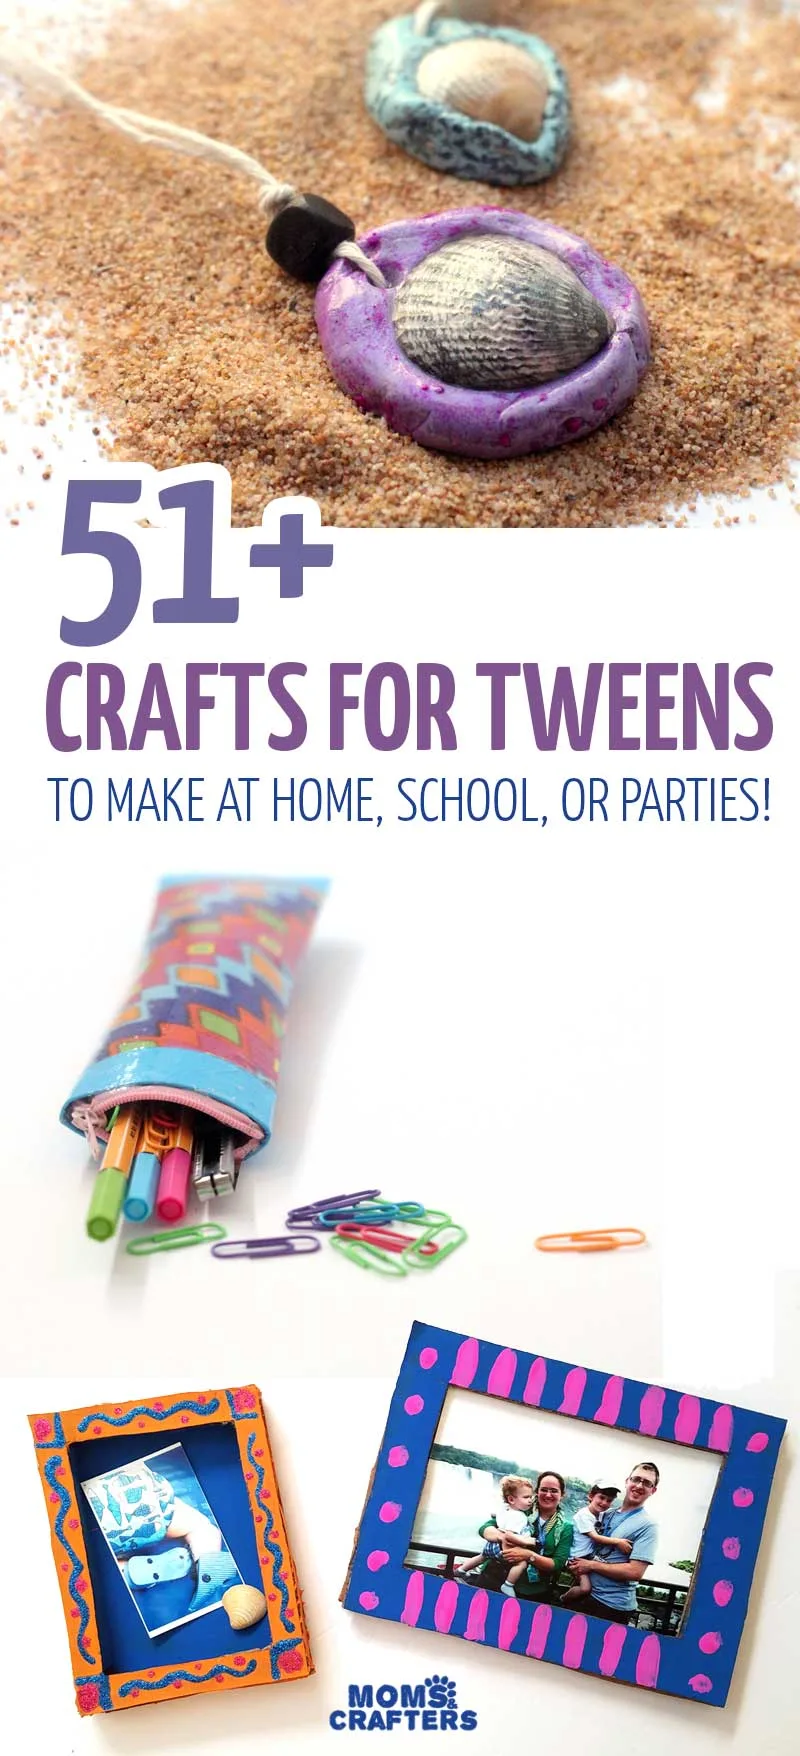 IF you're looking for the ultimate list of crafts for tweens you're in the right spot! So many ideas with a constantly updating list to get your tweenager's creativity going! #tweens #craftideas #teencrafts